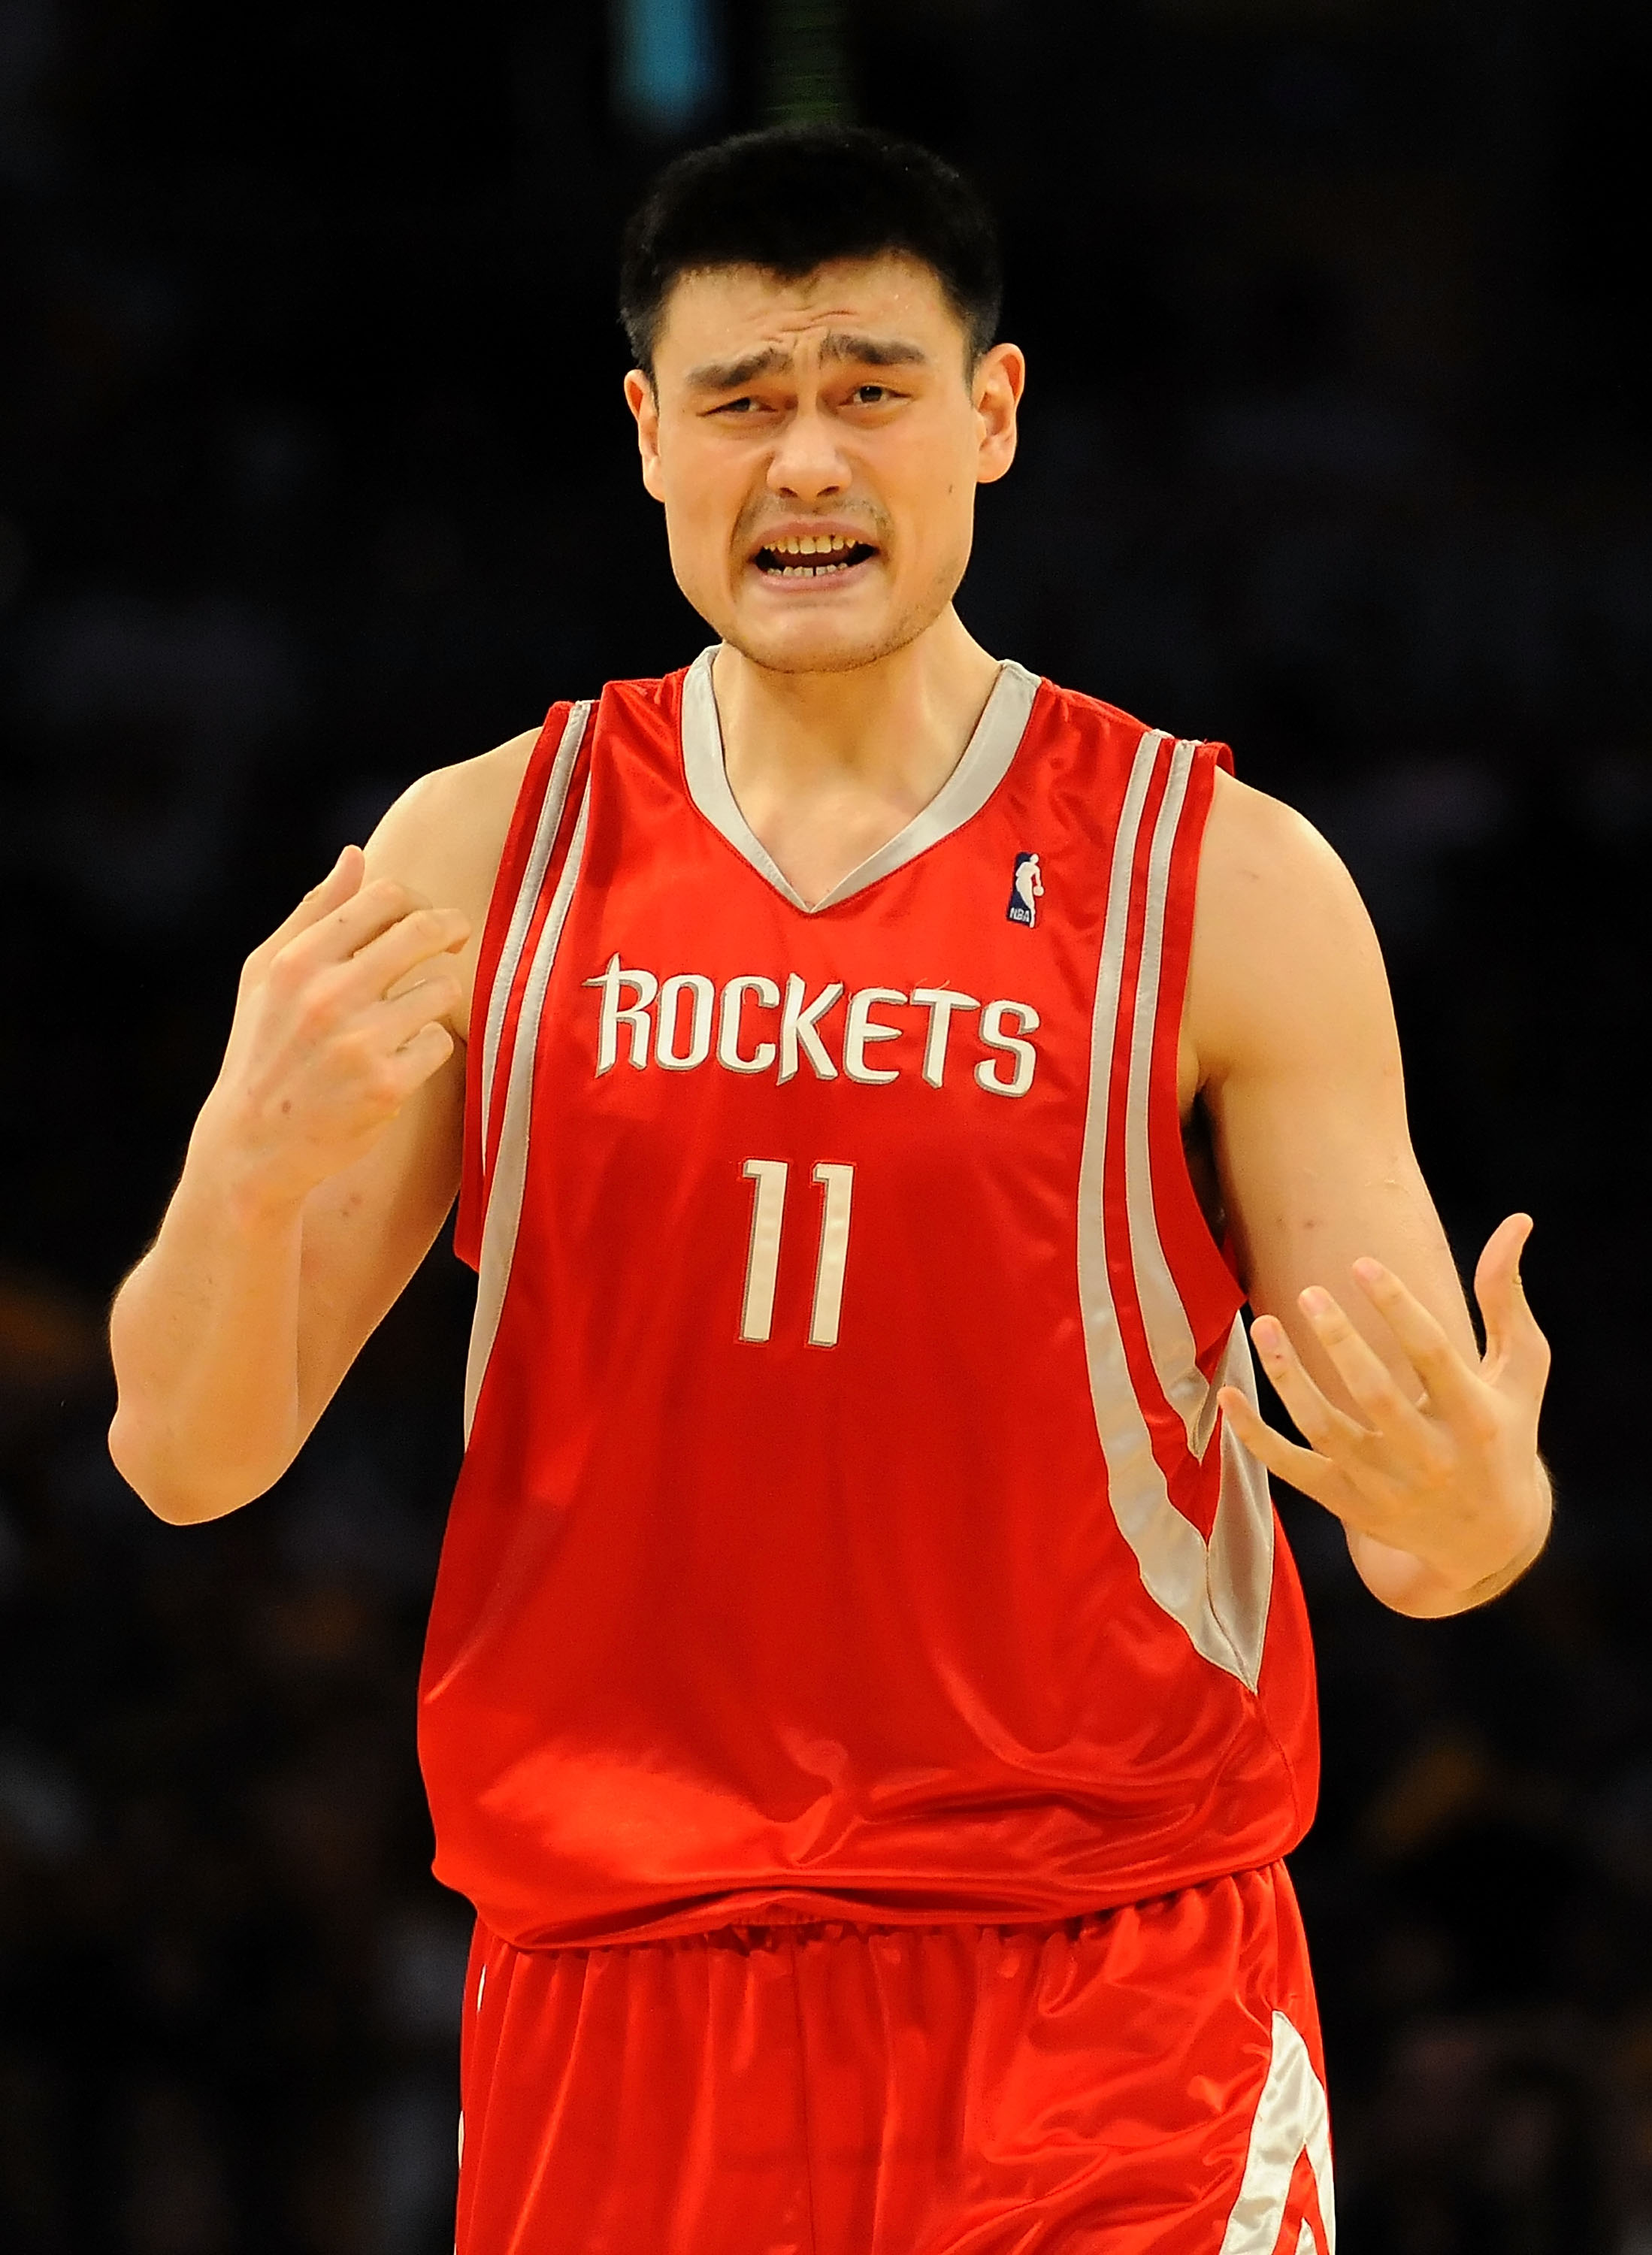 Yao Ming is one of the tallest athletes in history